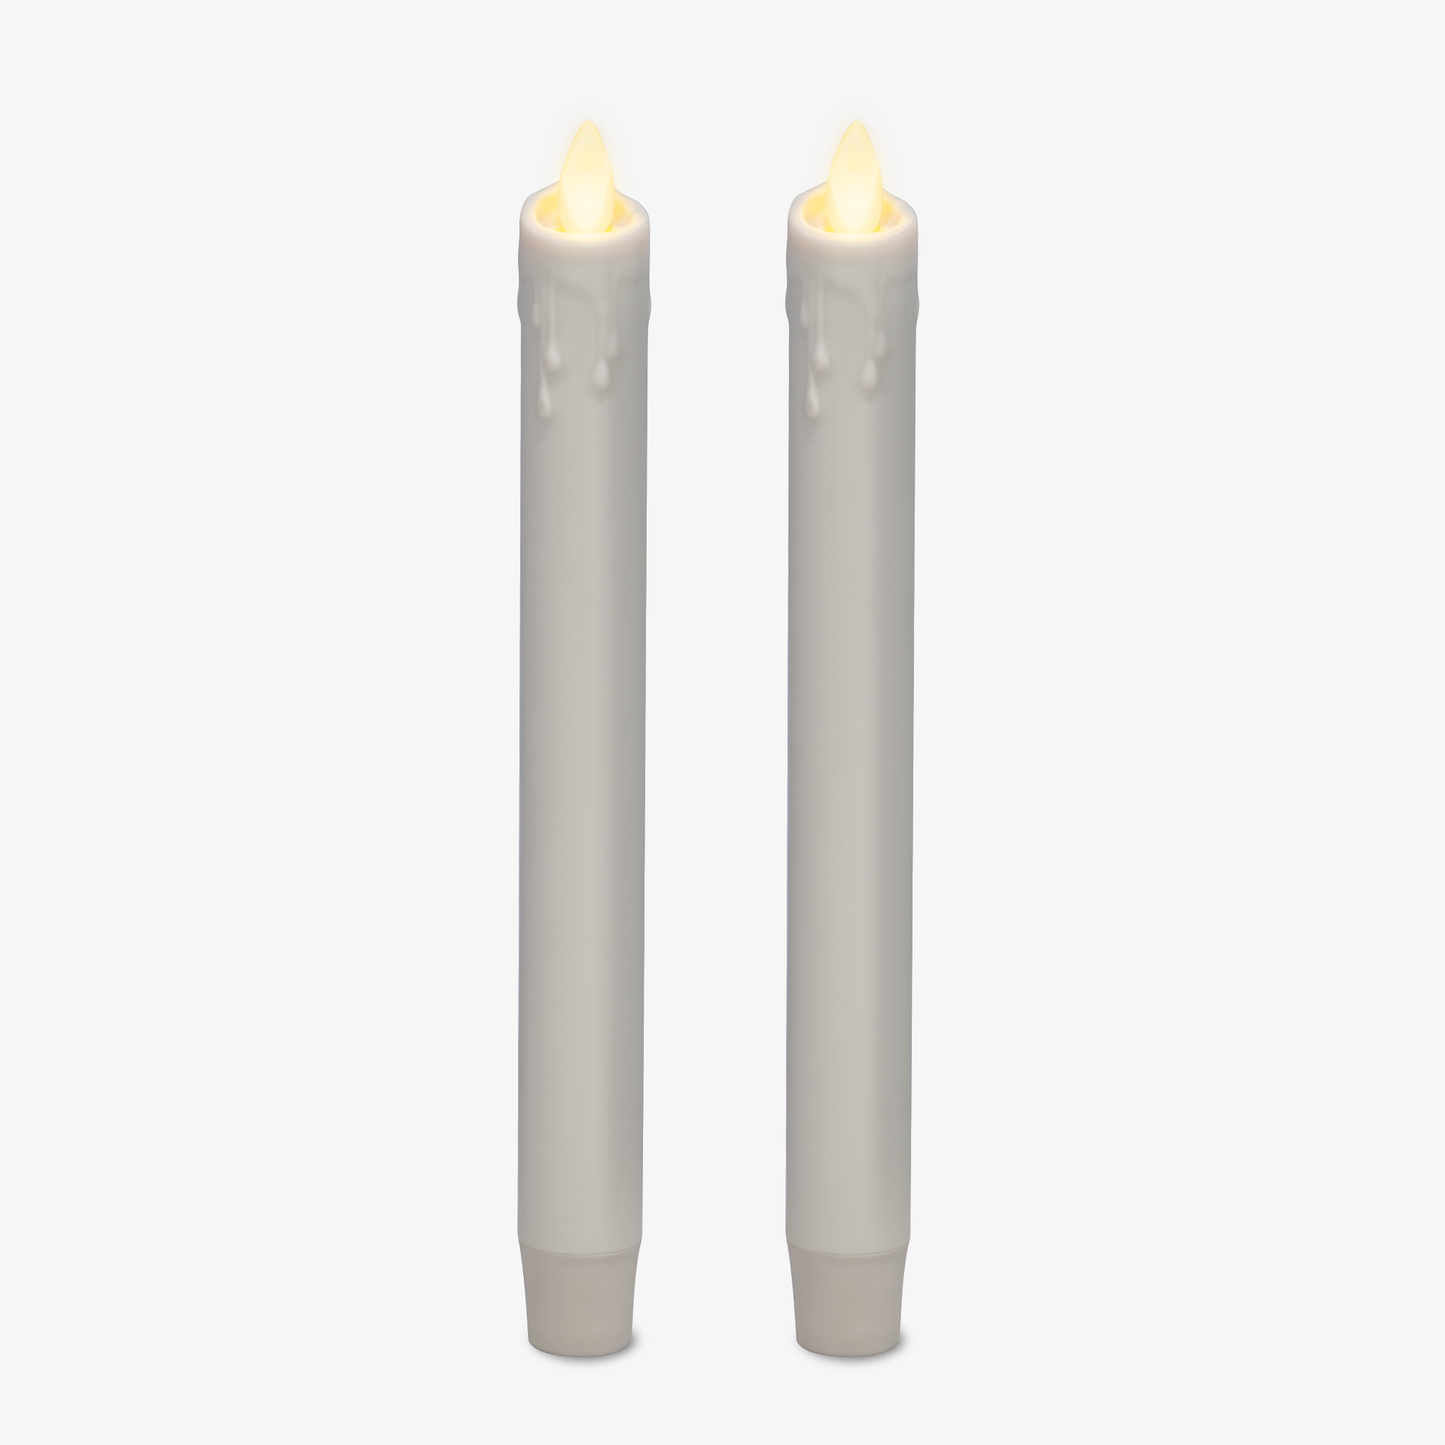 Set of 2 White Wax Drip Flameless Candle Tapers - Scallop Top